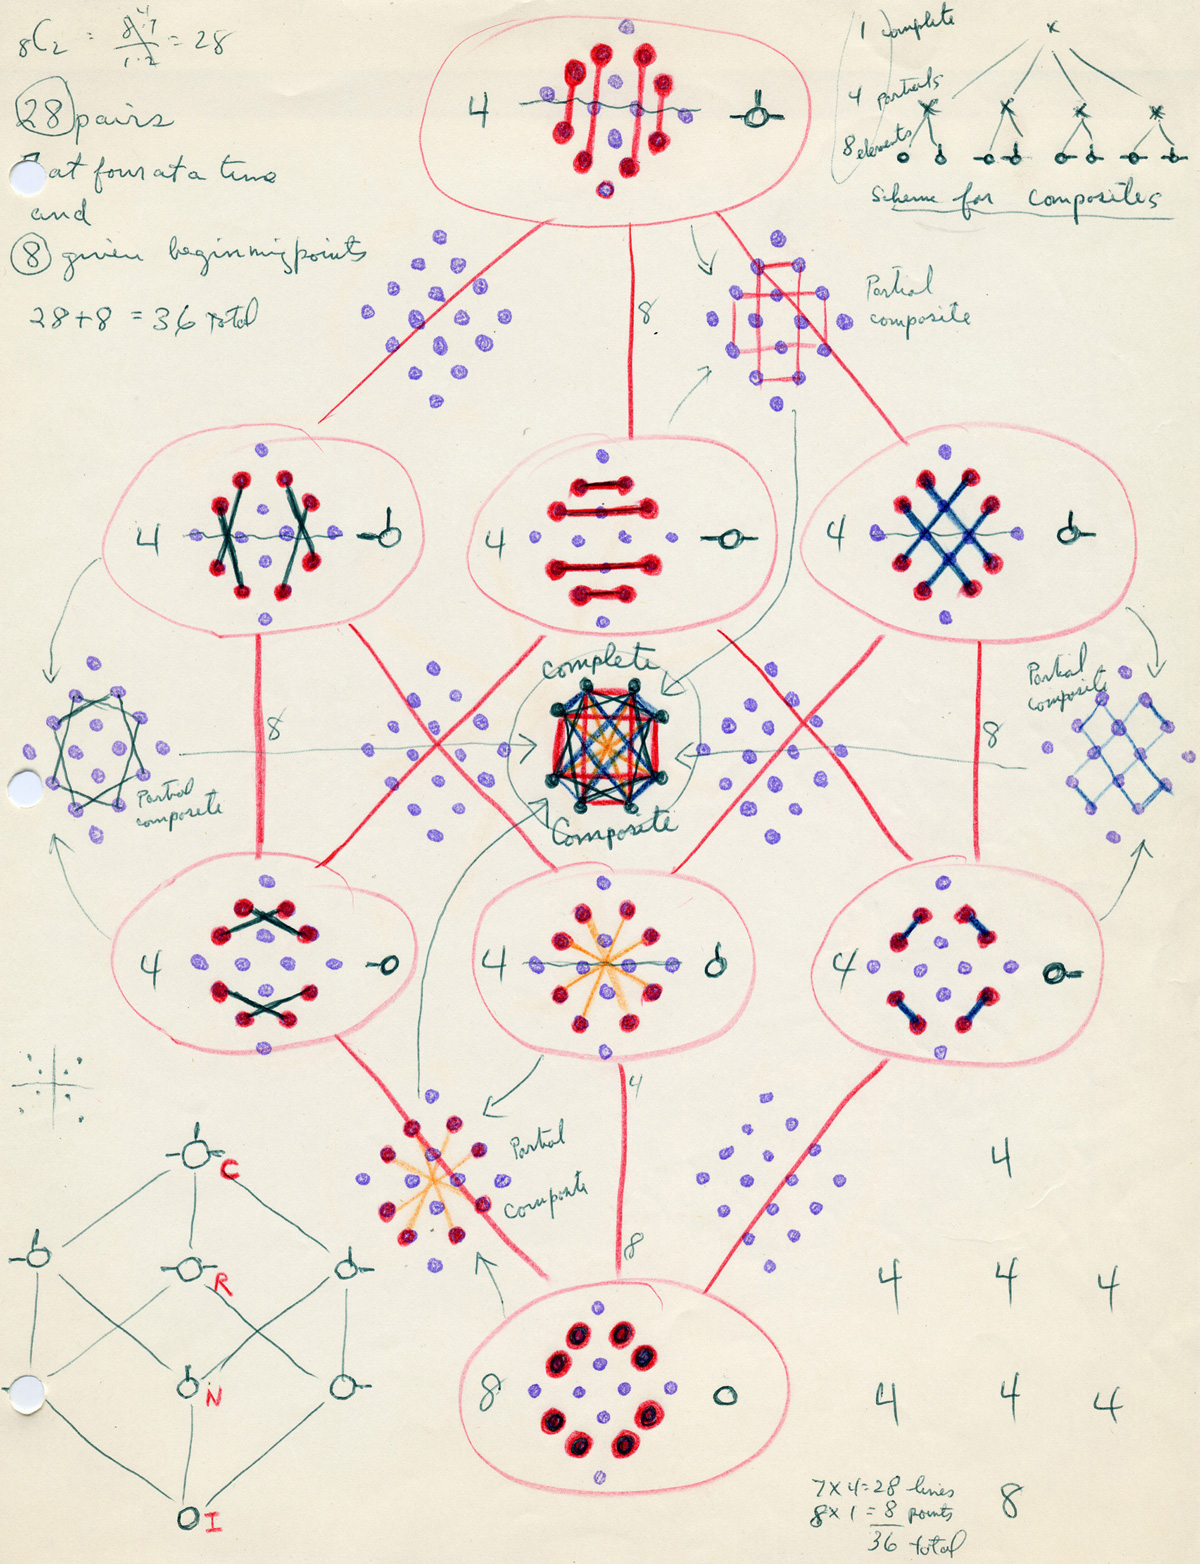 A set of drawings of the Logical Garnet on photostated dot-grids used by Zellweger as mental aids.